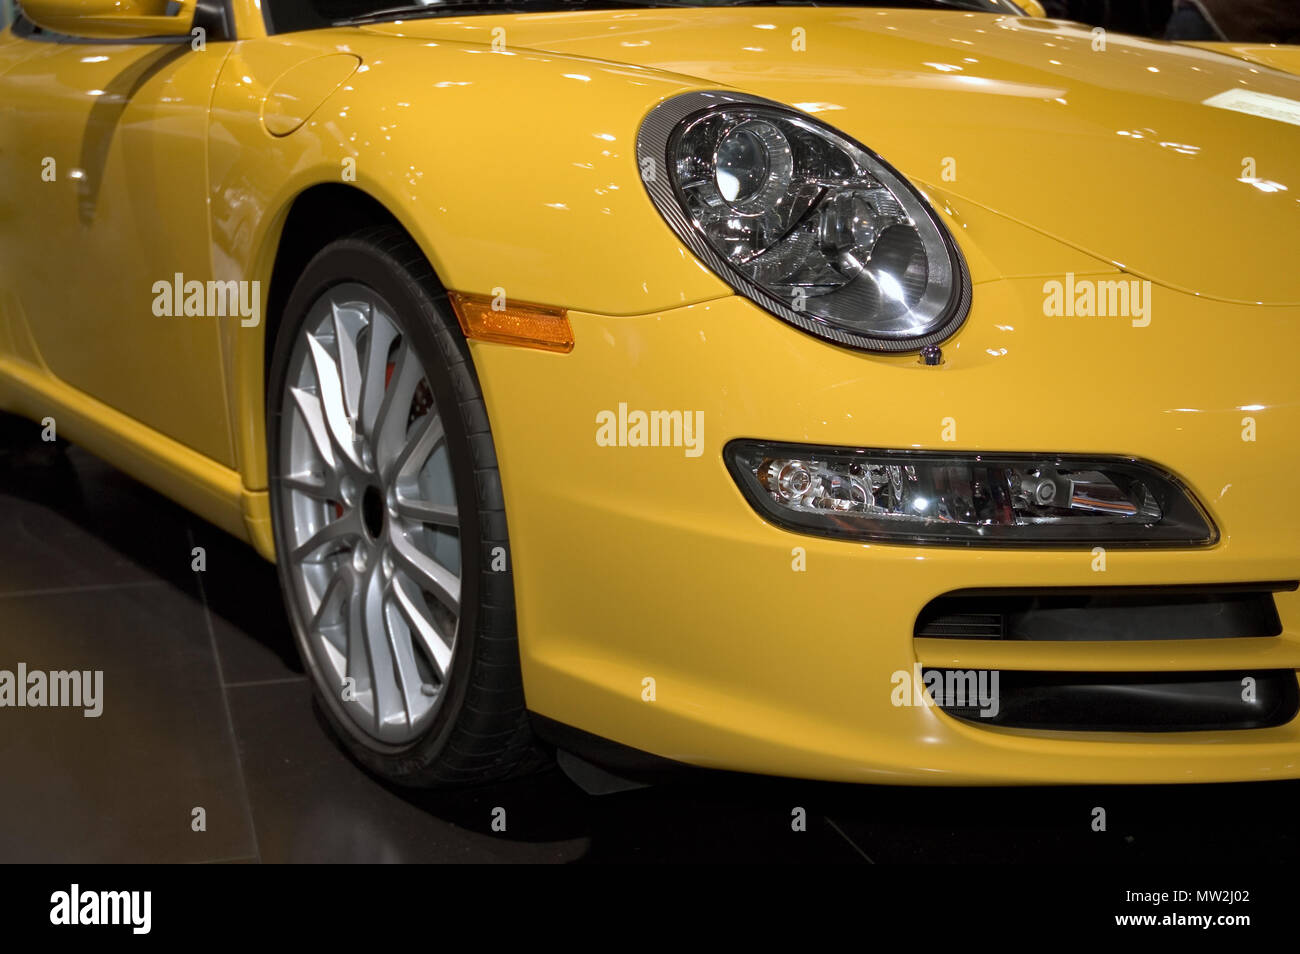 Close-up look at the front fender and headlight assembly of a yellow sports car. Many more car photos available in my gallery. Stock Photo